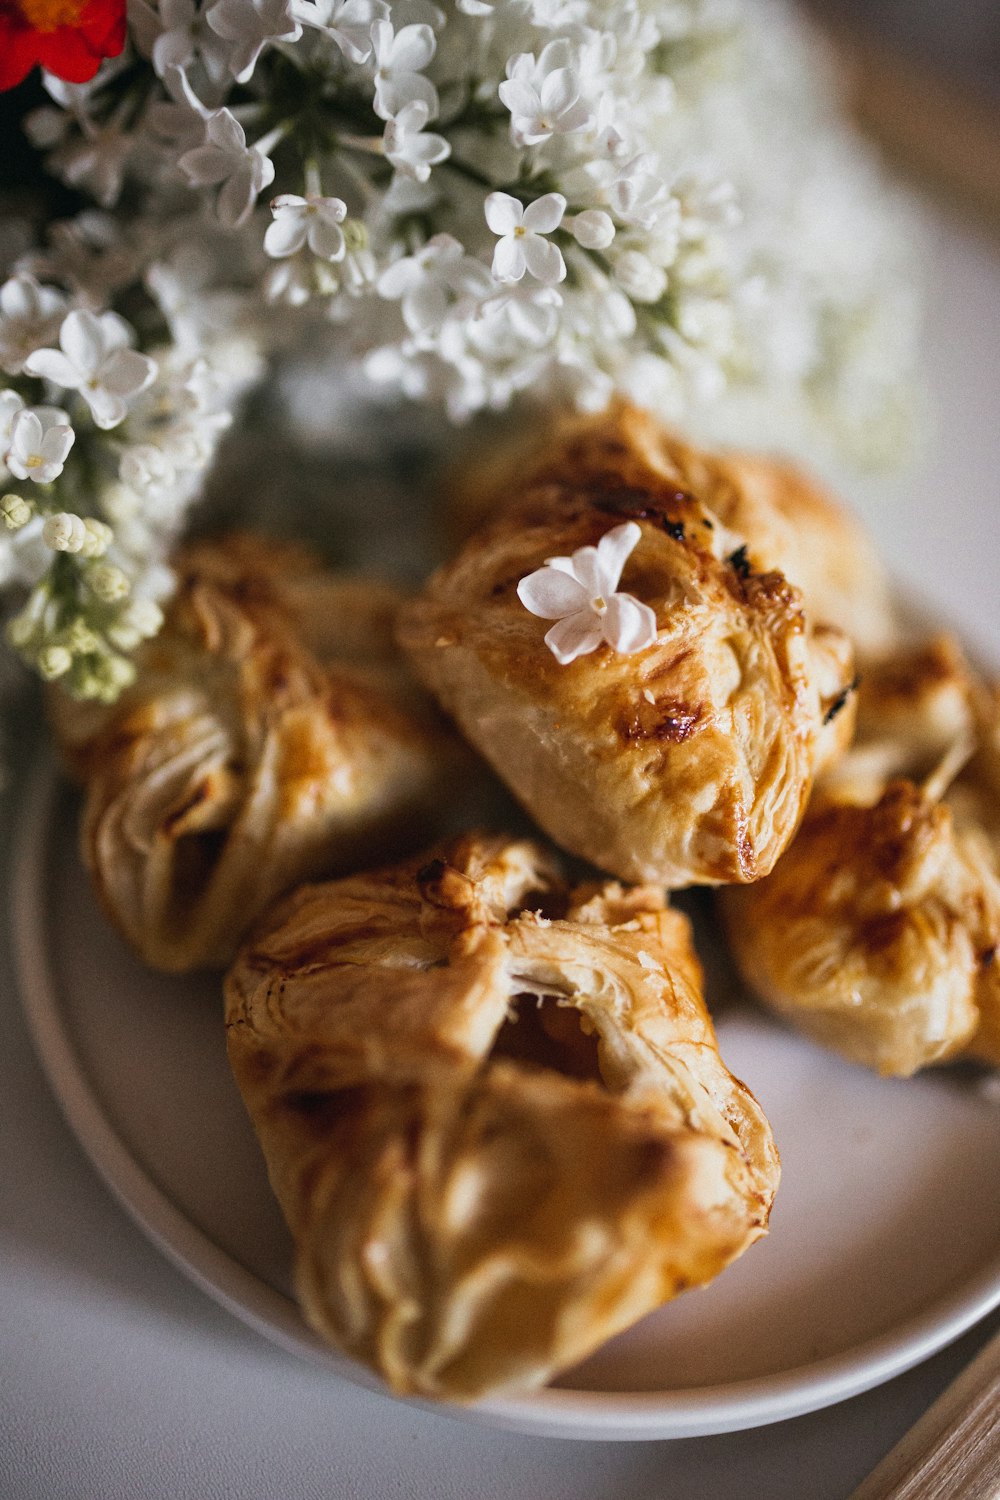 brown pastries on plated beside white flowers